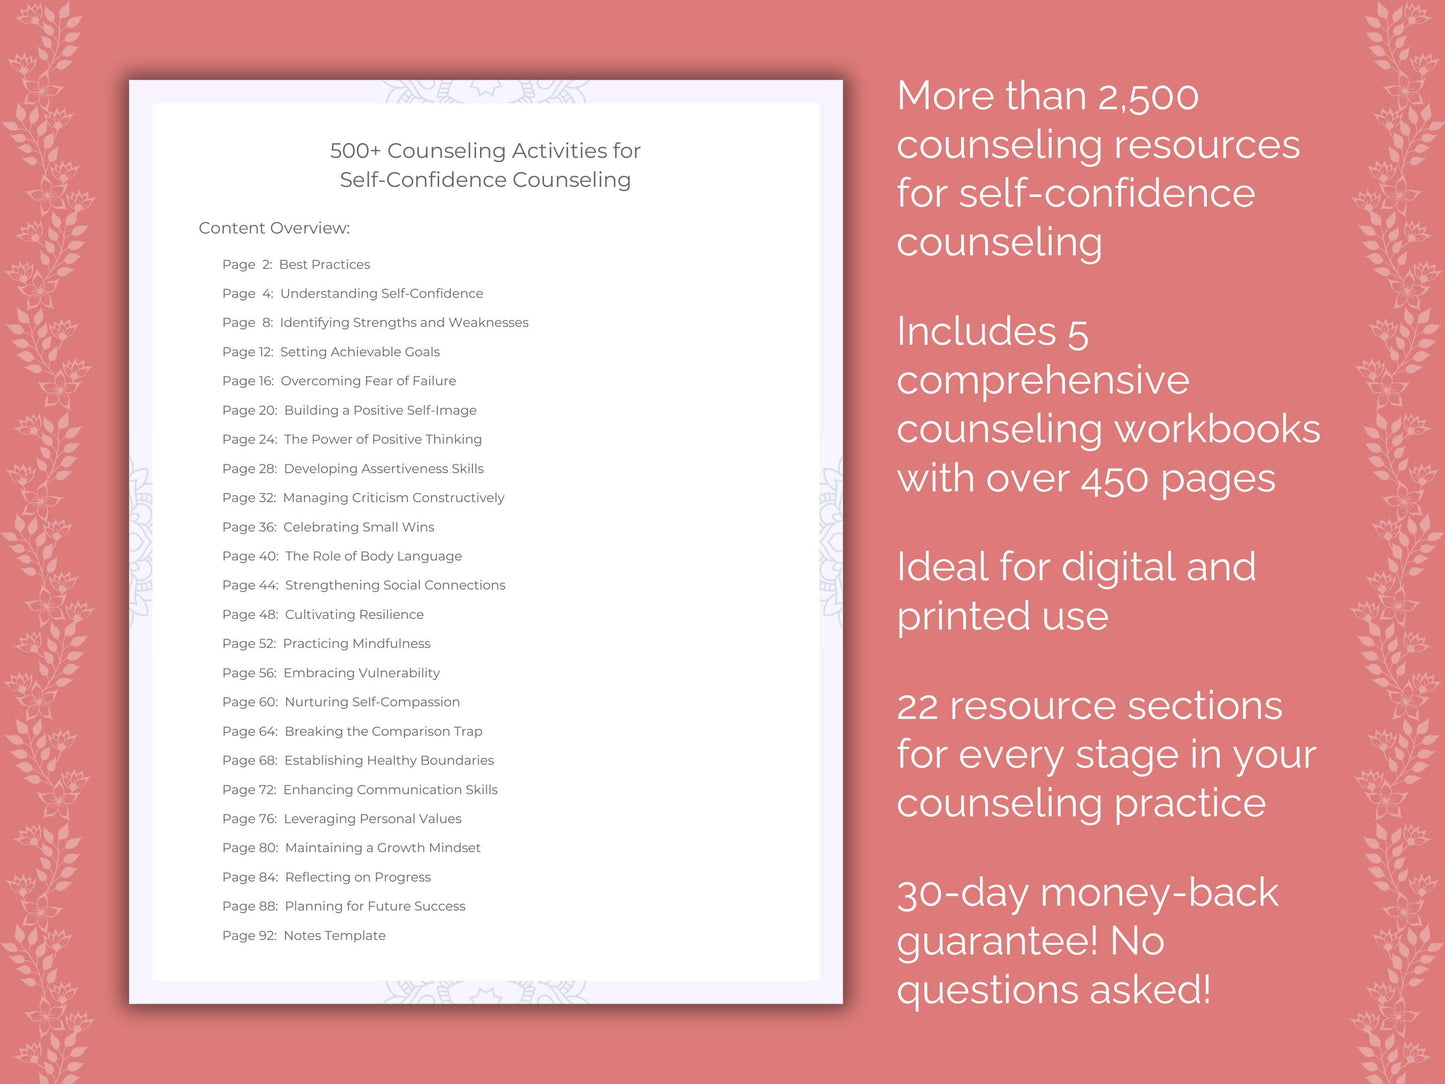 Therapist, Self-Confidence Idea, Therapy, Counseling, Counselor, Template, Content, Self-Confidence, Workbook, Worksheet, Mental Health, Self-Confidence Tool, Resource